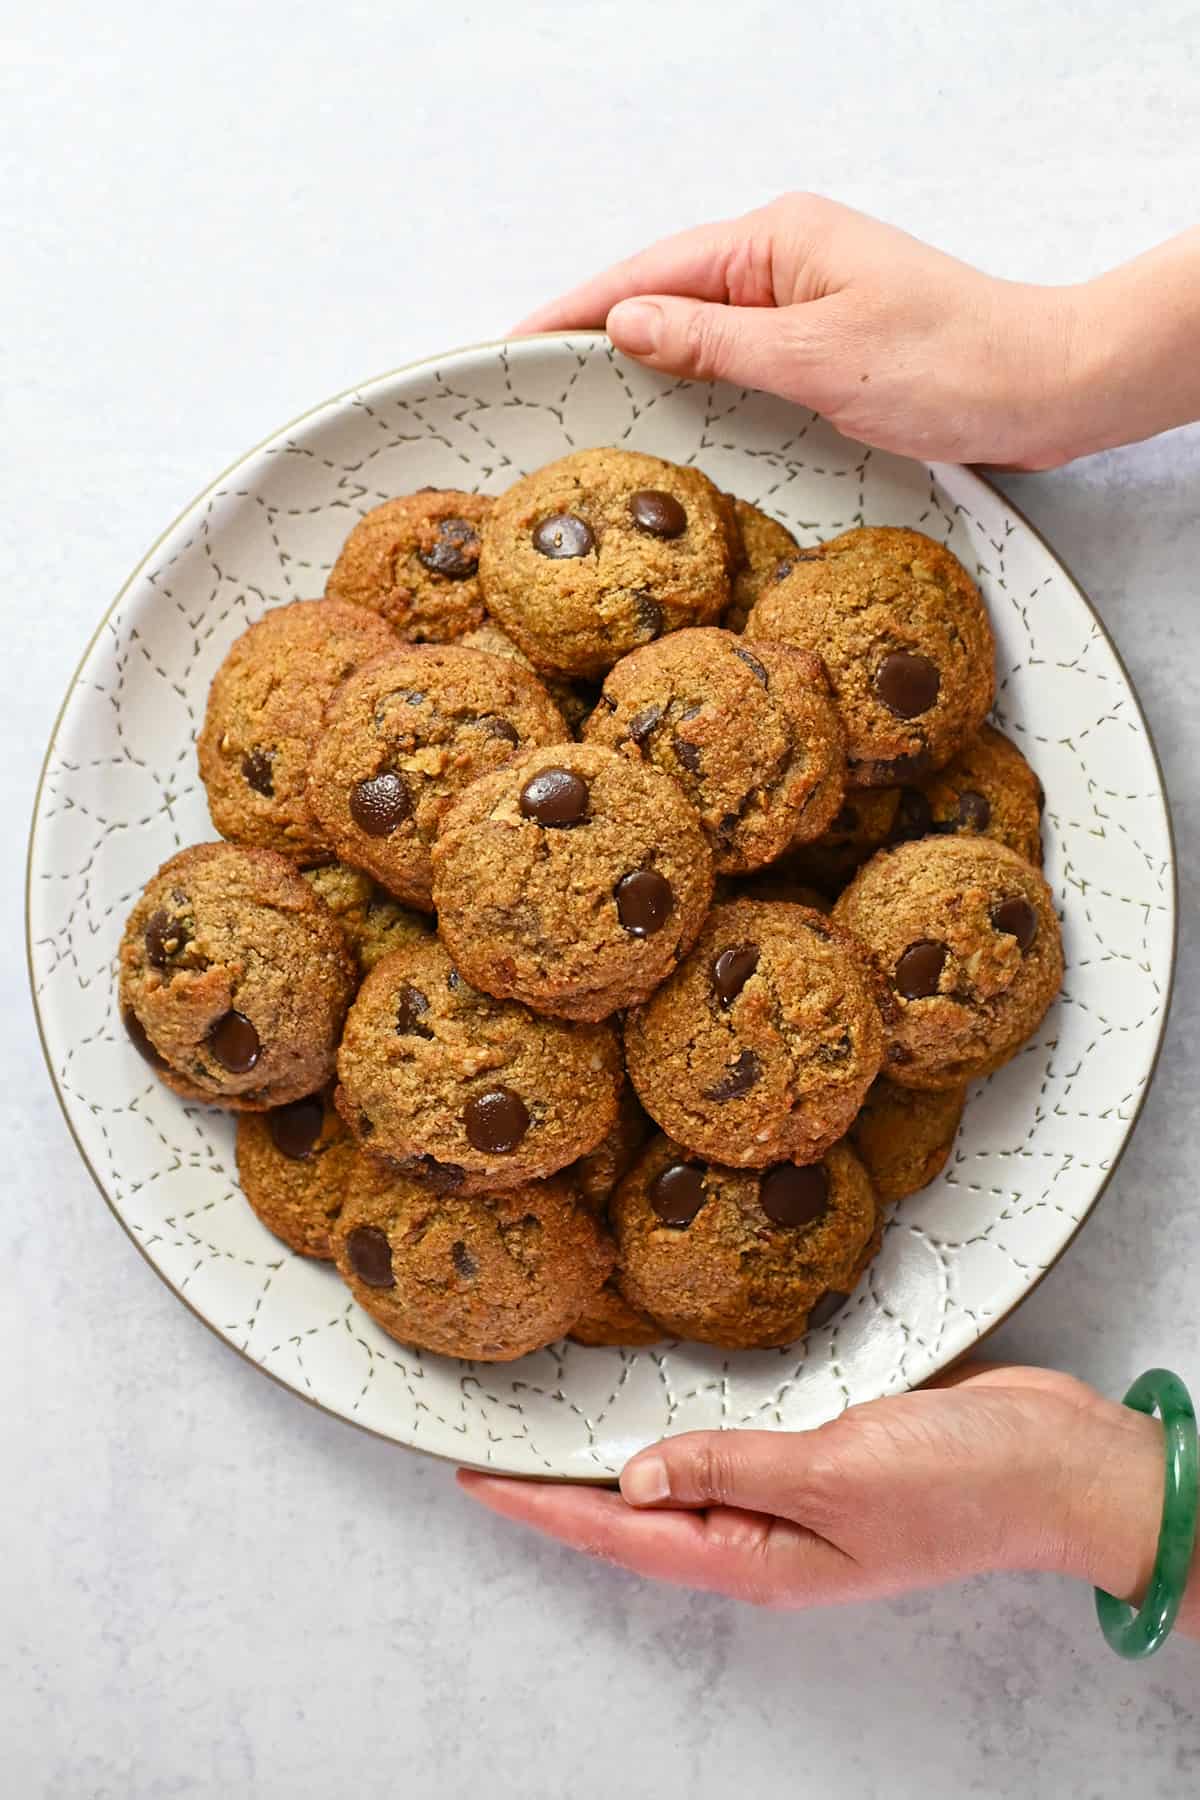 Nut-Free Chocolate Chip Cookies  Against All Grain - Delectable paleo  recipes to eat & feel great